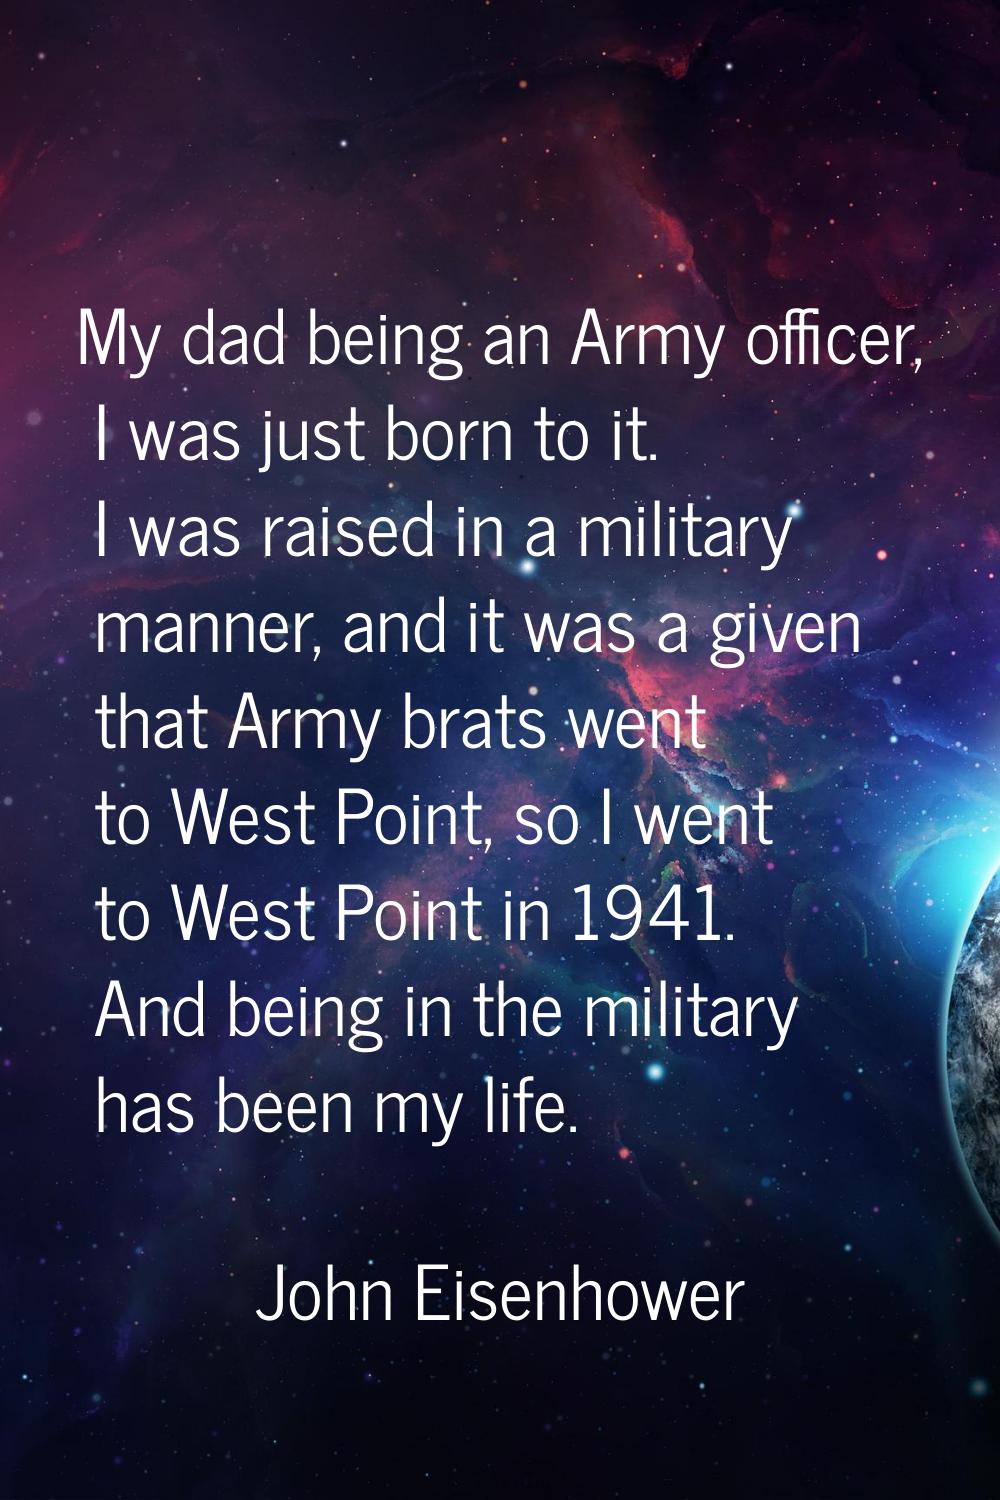 My dad being an Army officer, I was just born to it. I was raised in a military manner, and it was 